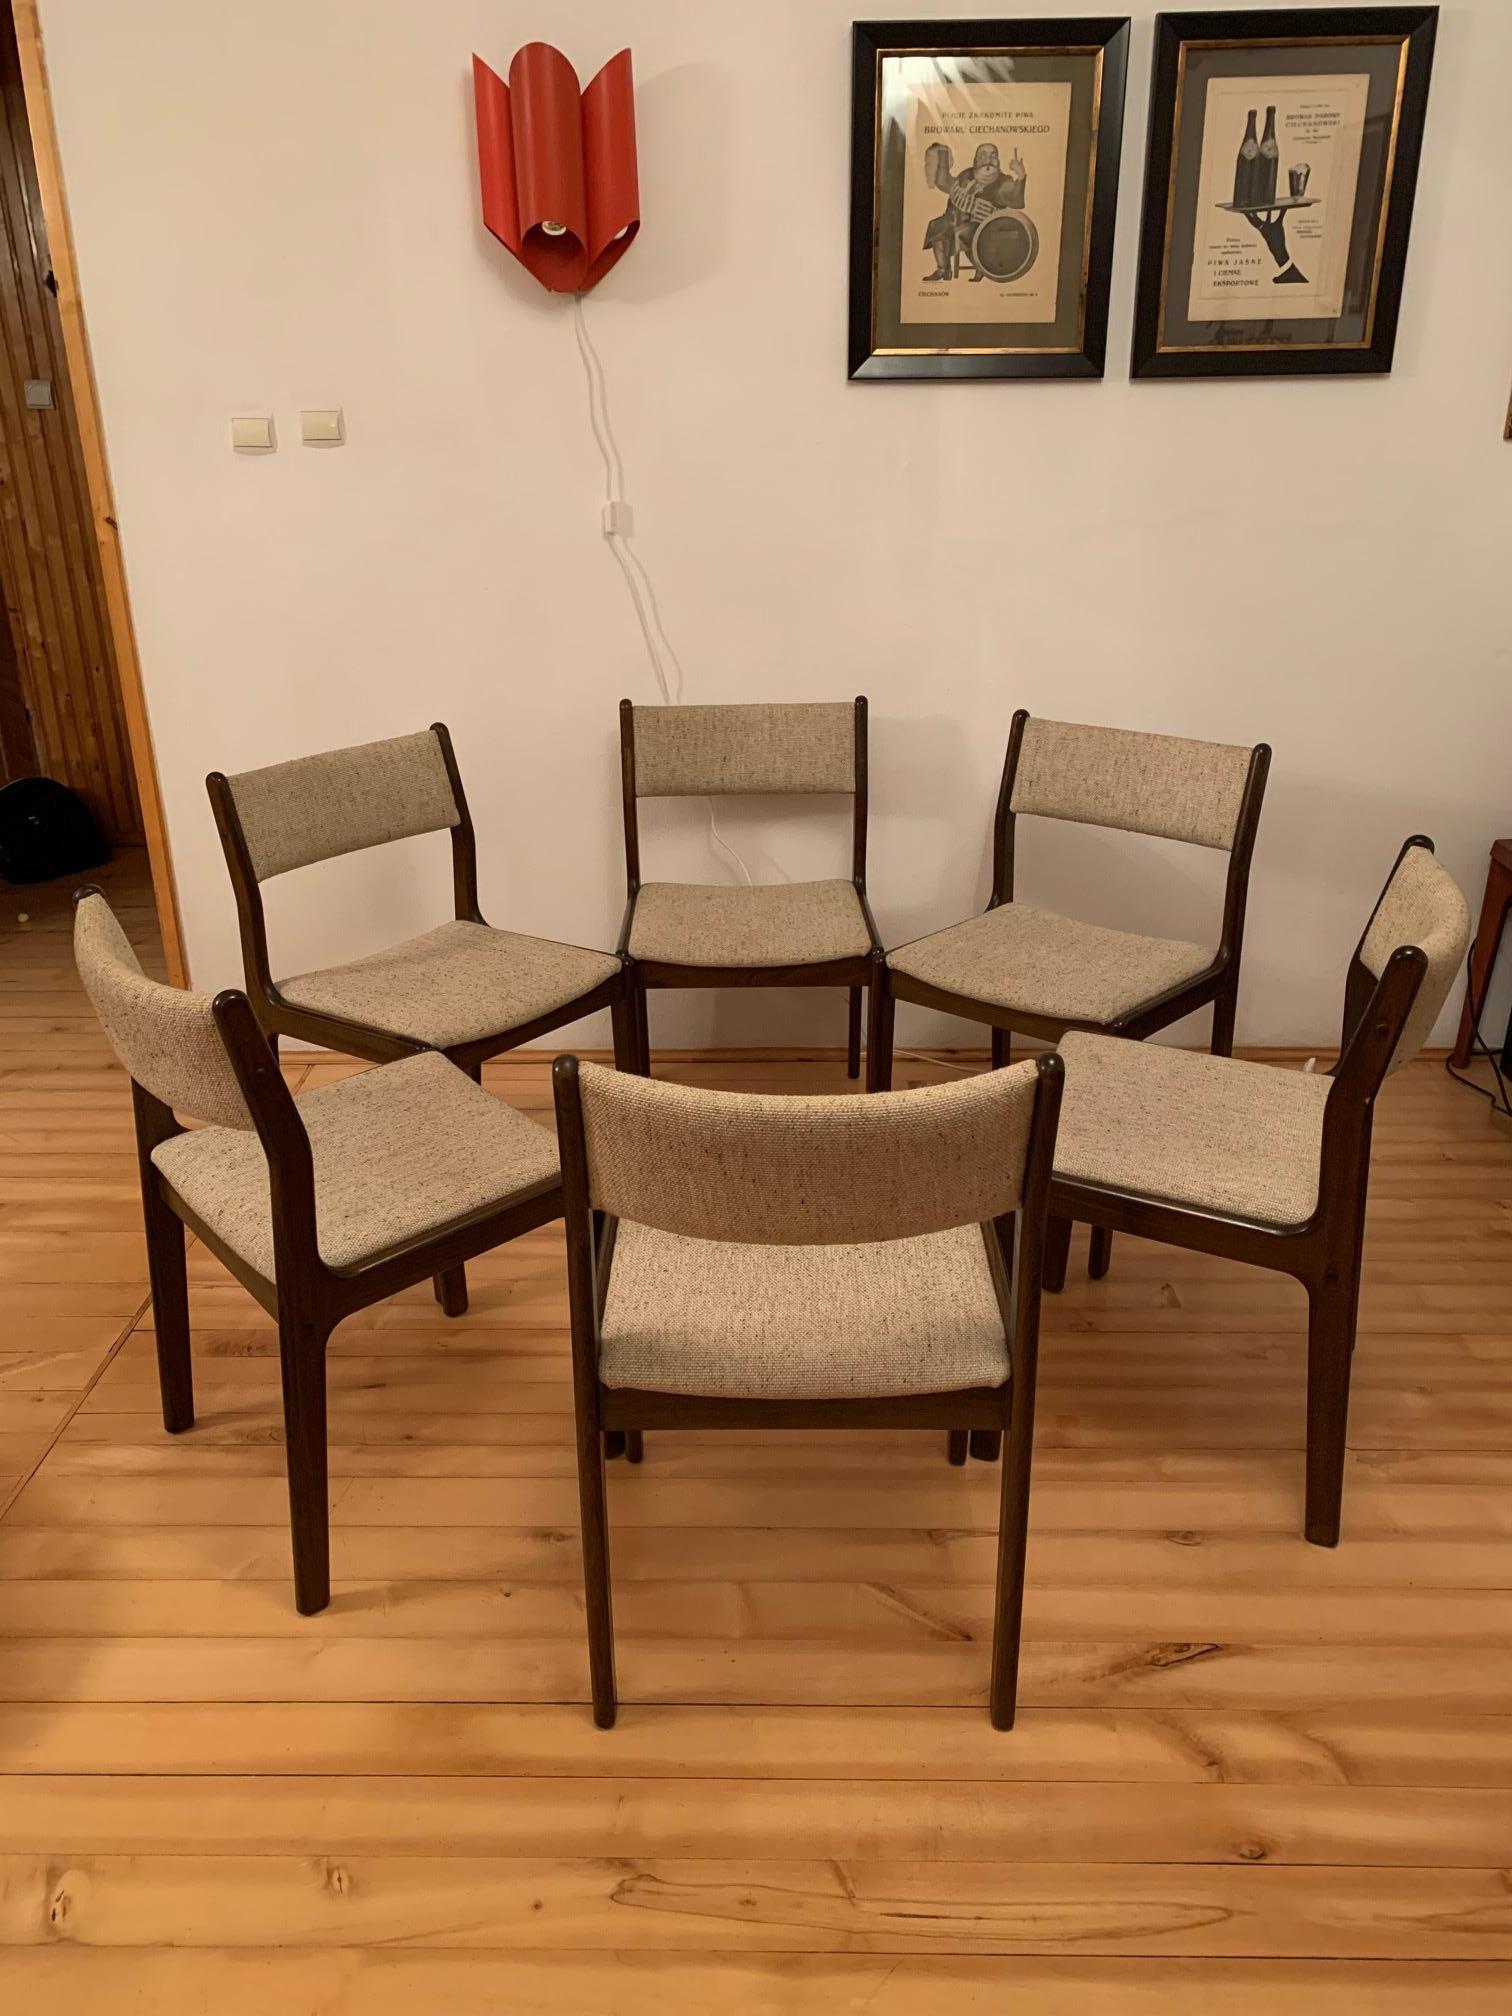 A set of six rosewood chairs designed by Erik Buch, Findahl’s Møbelfabrik, Denmark, 1960s original and signed chairs. Very good condition. Original upholstery made of wool. A Classic, timeless and comfortable form.